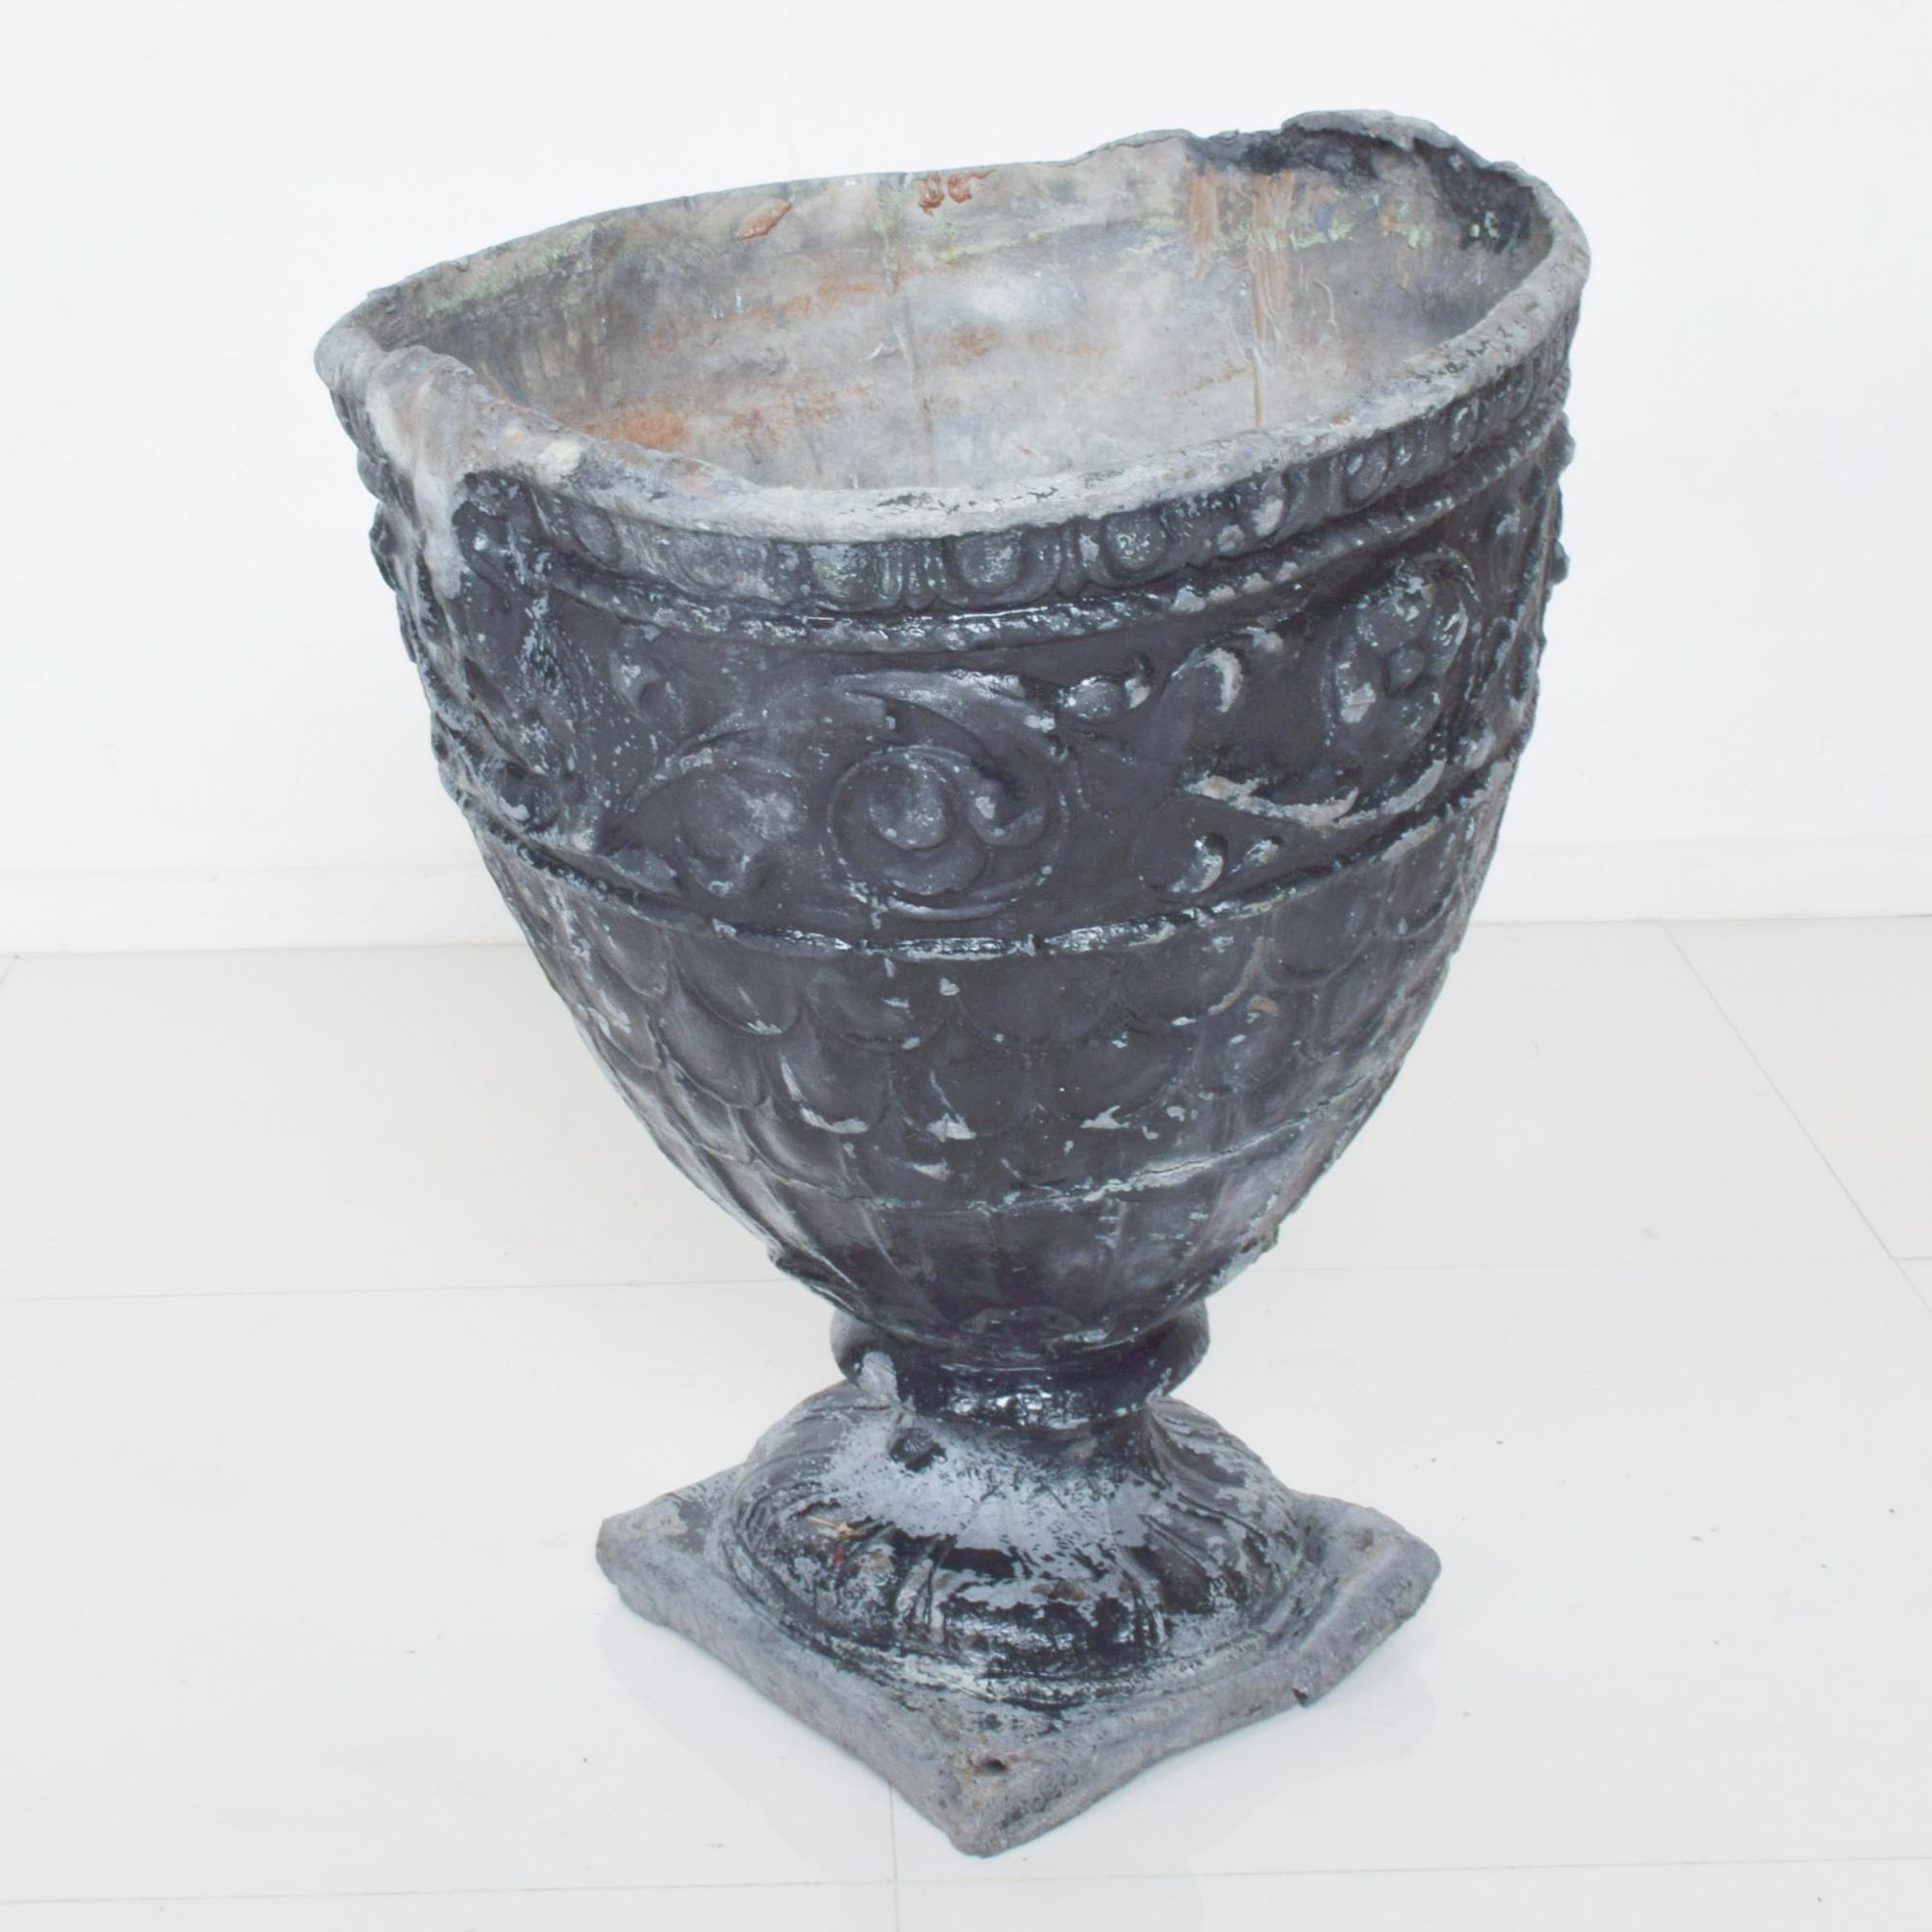 Antique English lead planter urn vase features decorative floral scroll
A magnificent jardinière garden pot entryway statement.
Stamped Made in England. Extremely heavy over 200 lbs. Limited information available.
Dimensions: 27 1/2